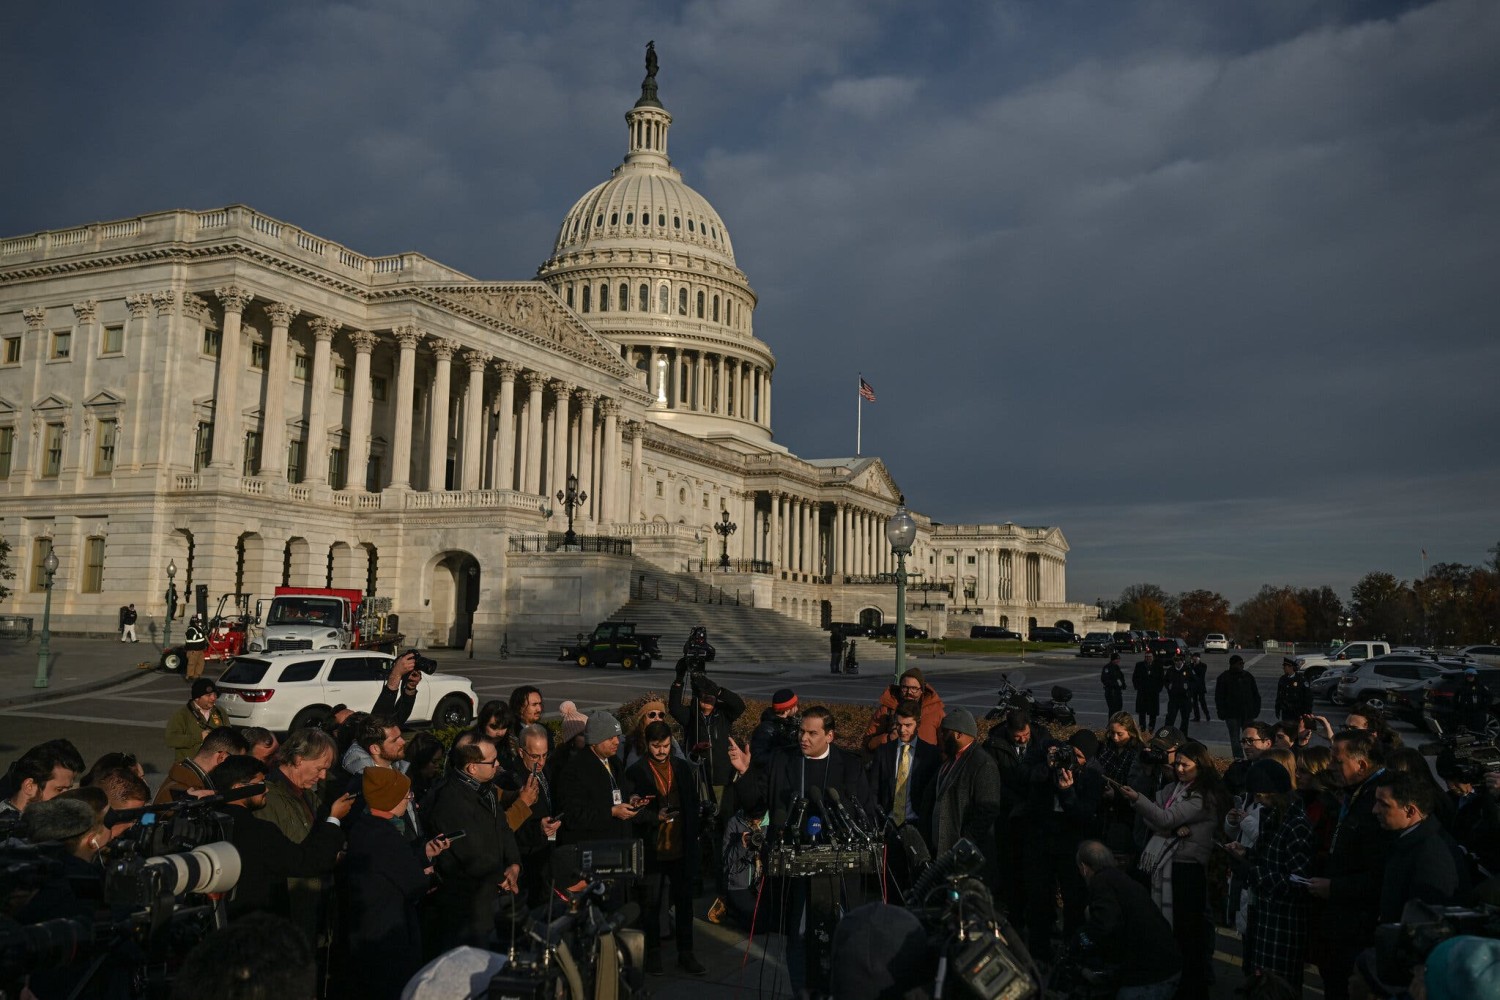 George Santos argued against his expulsion at an early-morning news conference outside the U.S. Capitol on Thursday.Credit...Kenny Holston/The New York Times